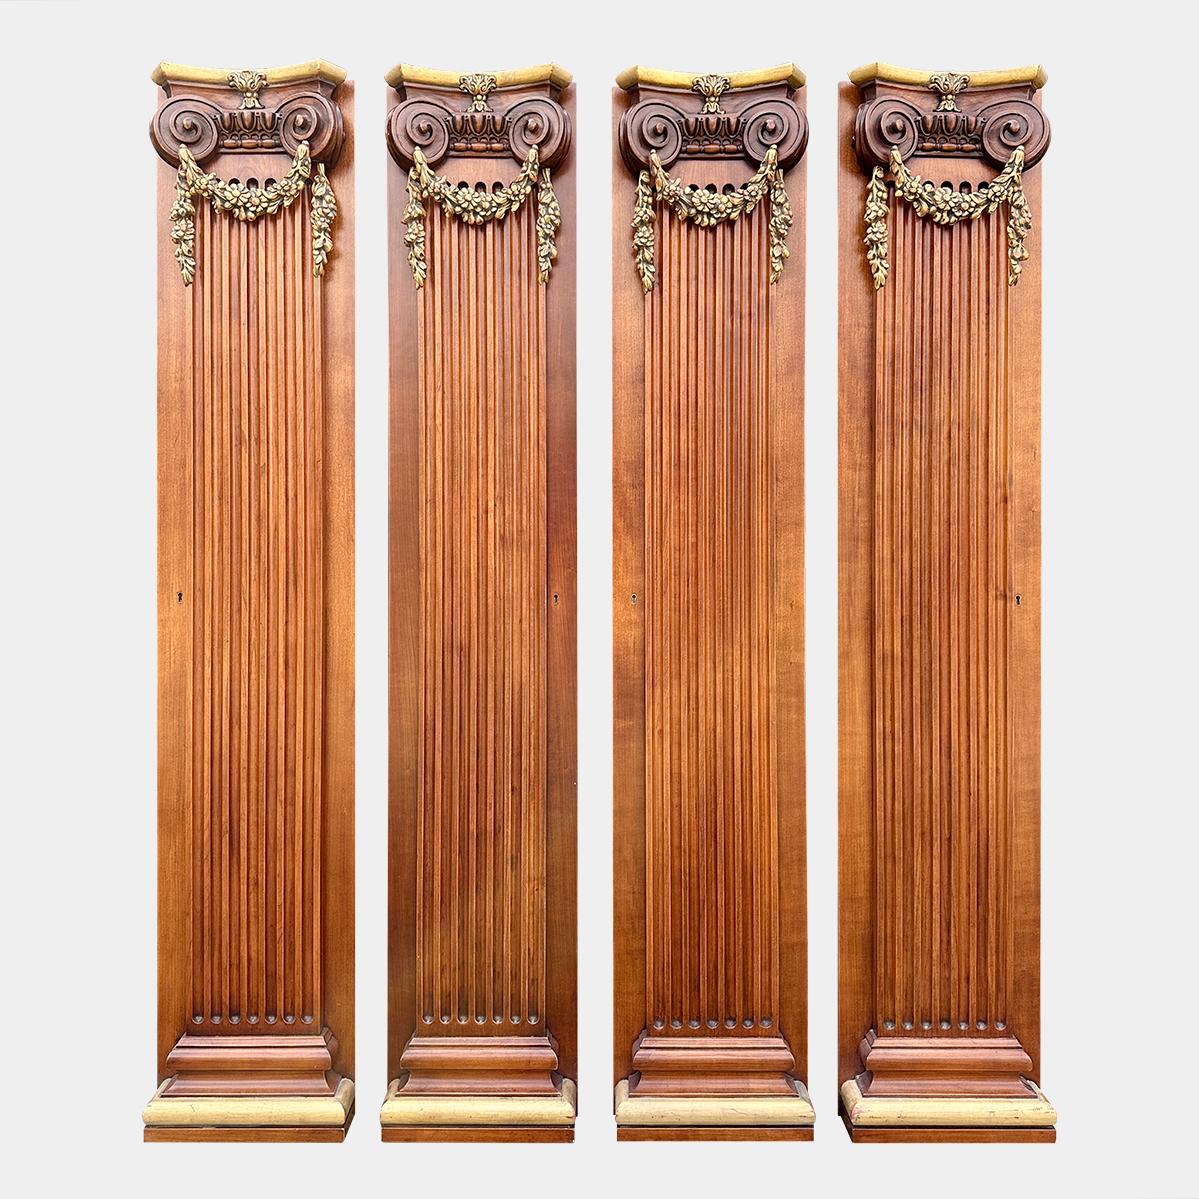 A set of 4 reclaimed pilasters with gilt wood carved capitals and gilt socles. 
The fluted pilasters with carved  gilt floral drapery hung from Ionic capitals.
These were used as doors to hidden spaces in a library. At just over 6ft tall and 1ft